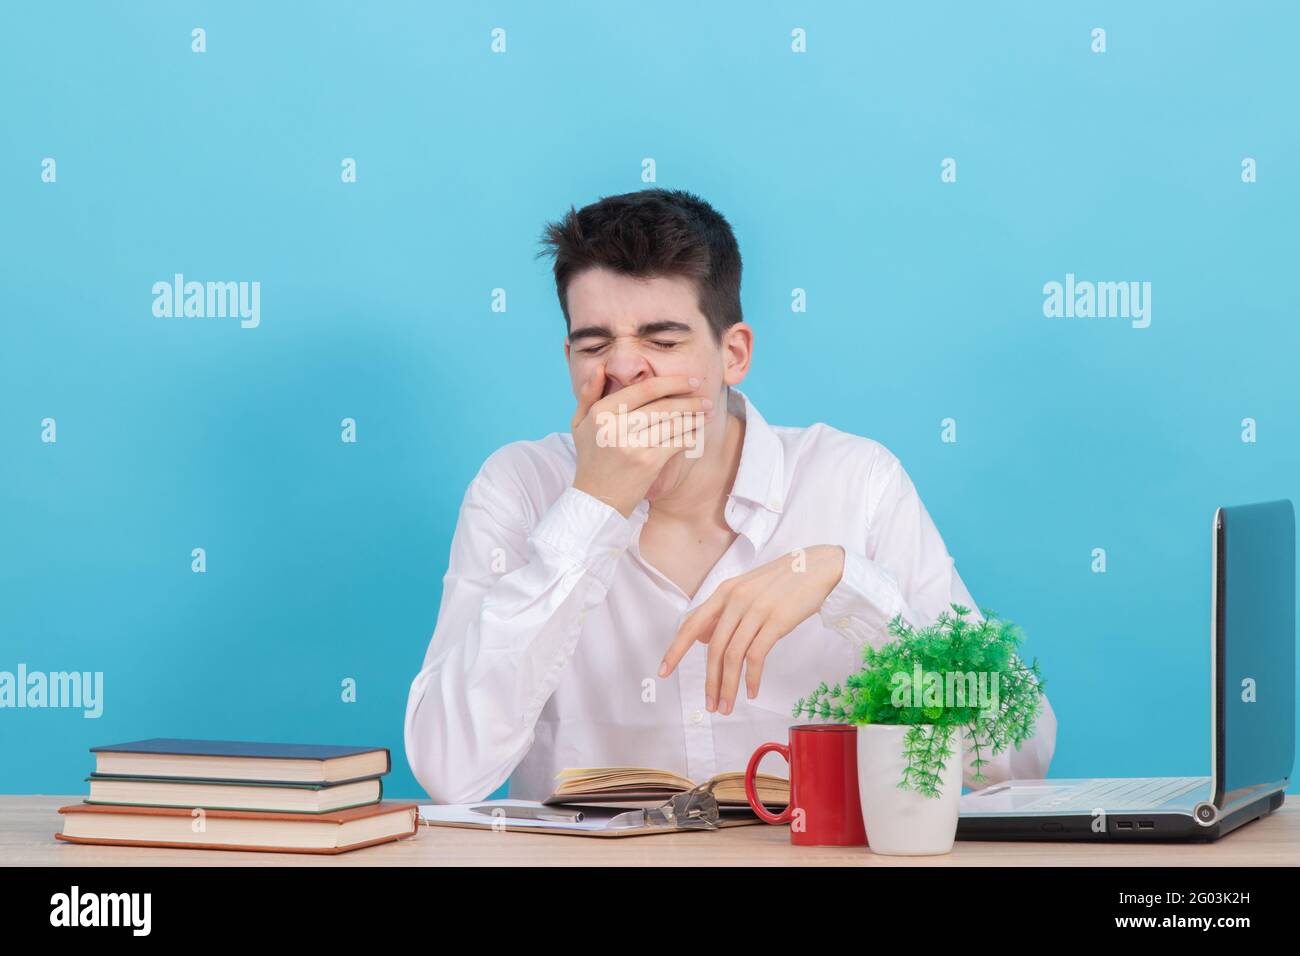 bored or tired student yawning at the desk with books and computer Stock Photo